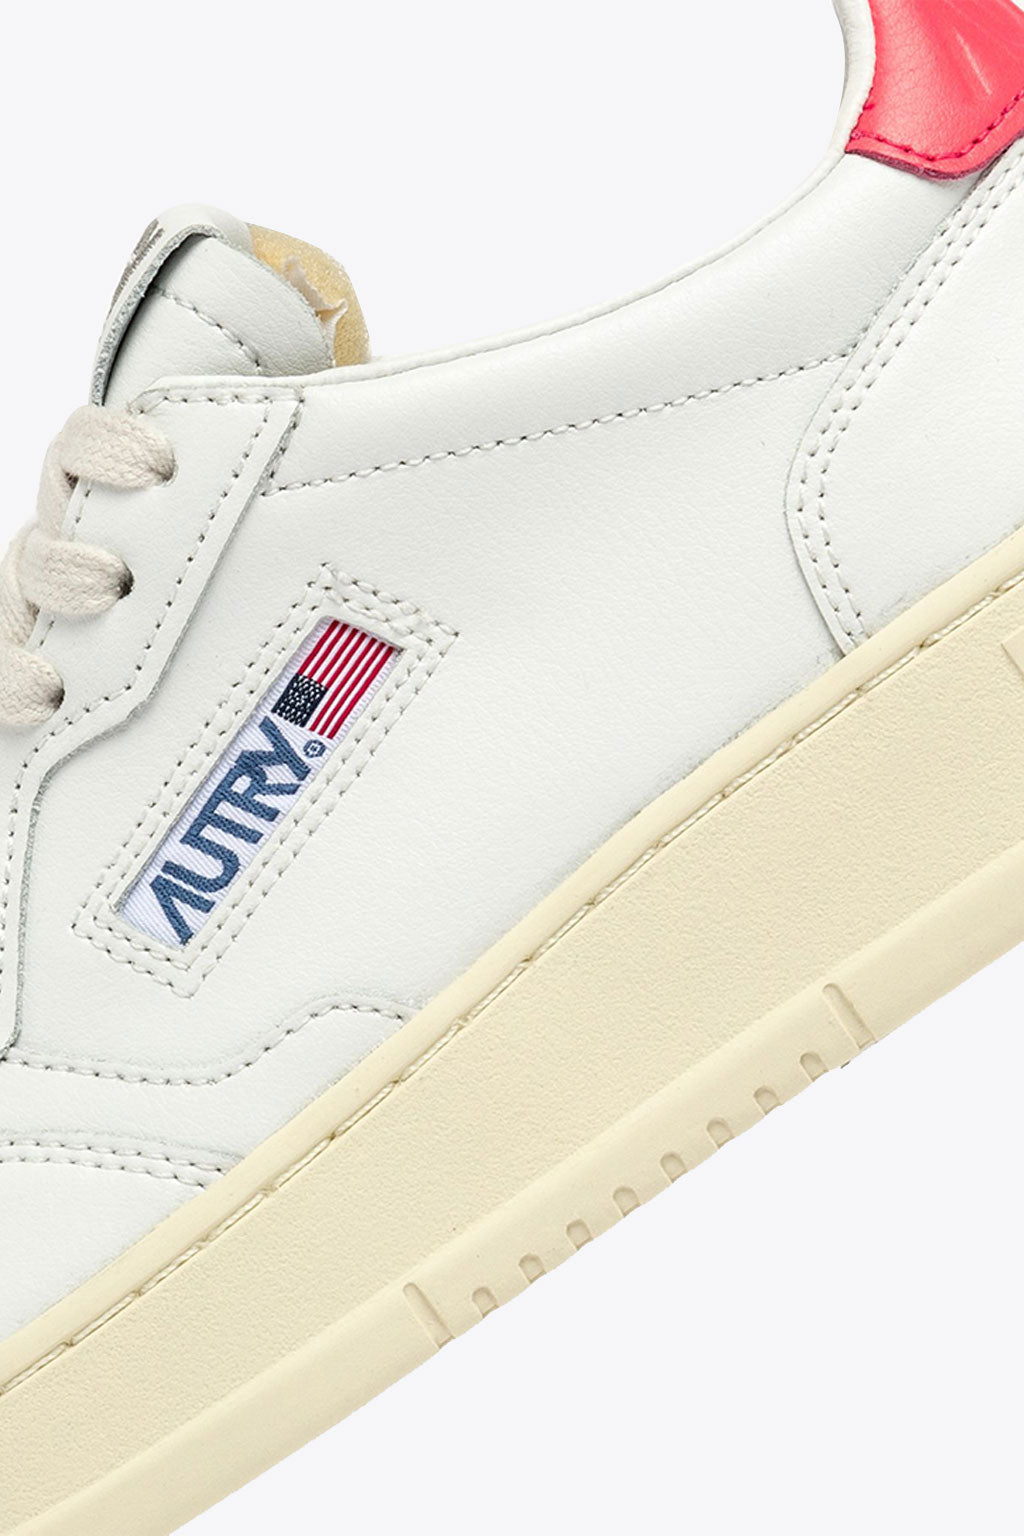 alt-image__White-leather-low-sneaker-with-coral-red-tab---Medalist